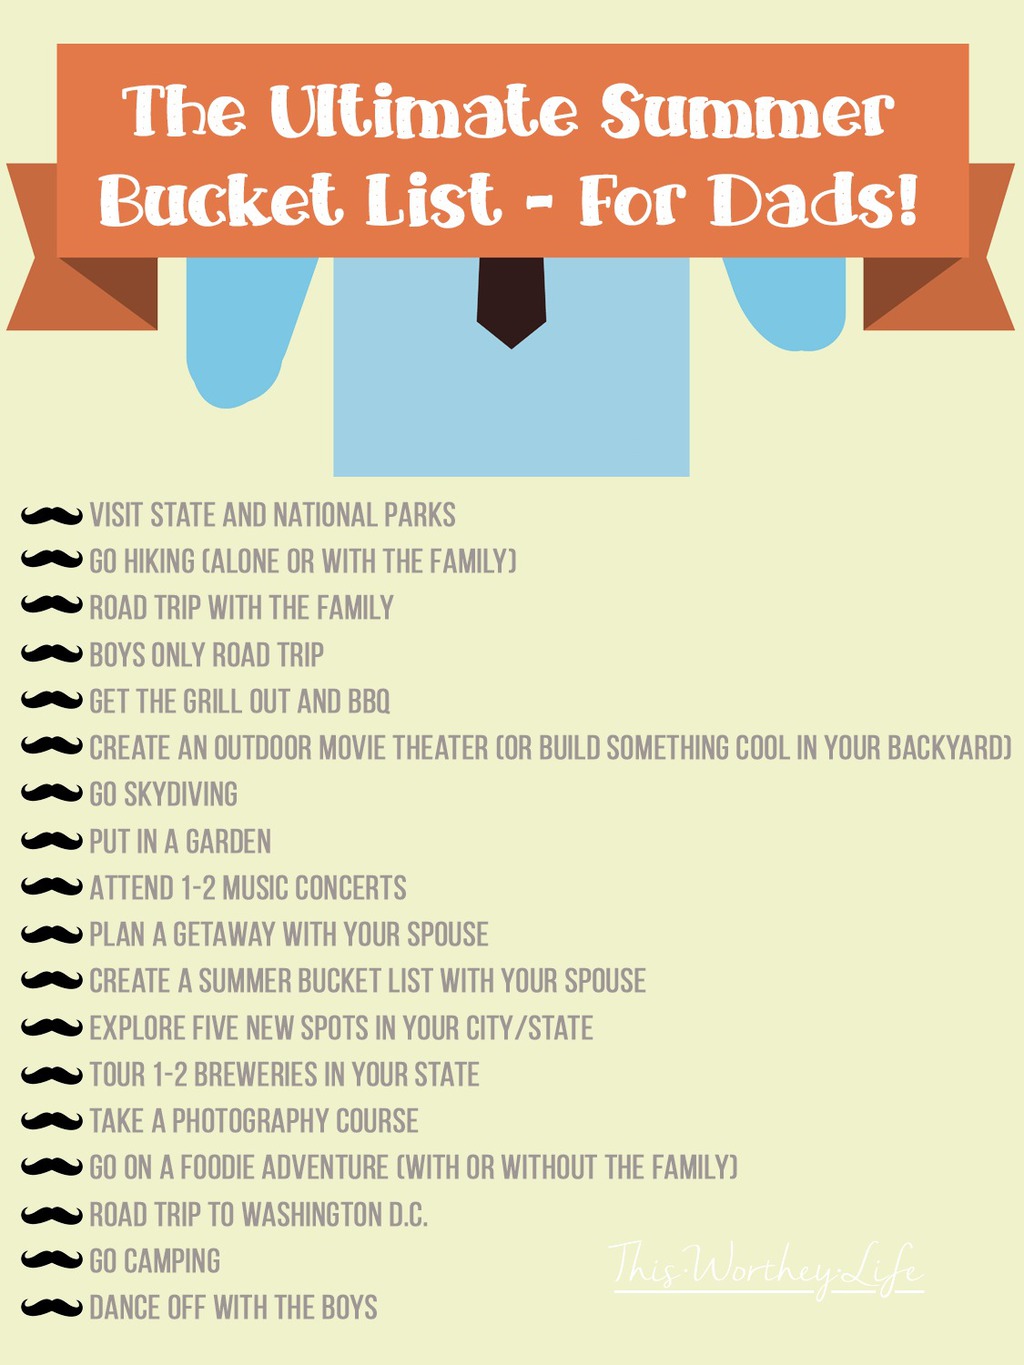 Dads, when's the last time you made a list of fun things to do over the summer? Use our printable to help you plan the ultimate summer bucket list for dads!